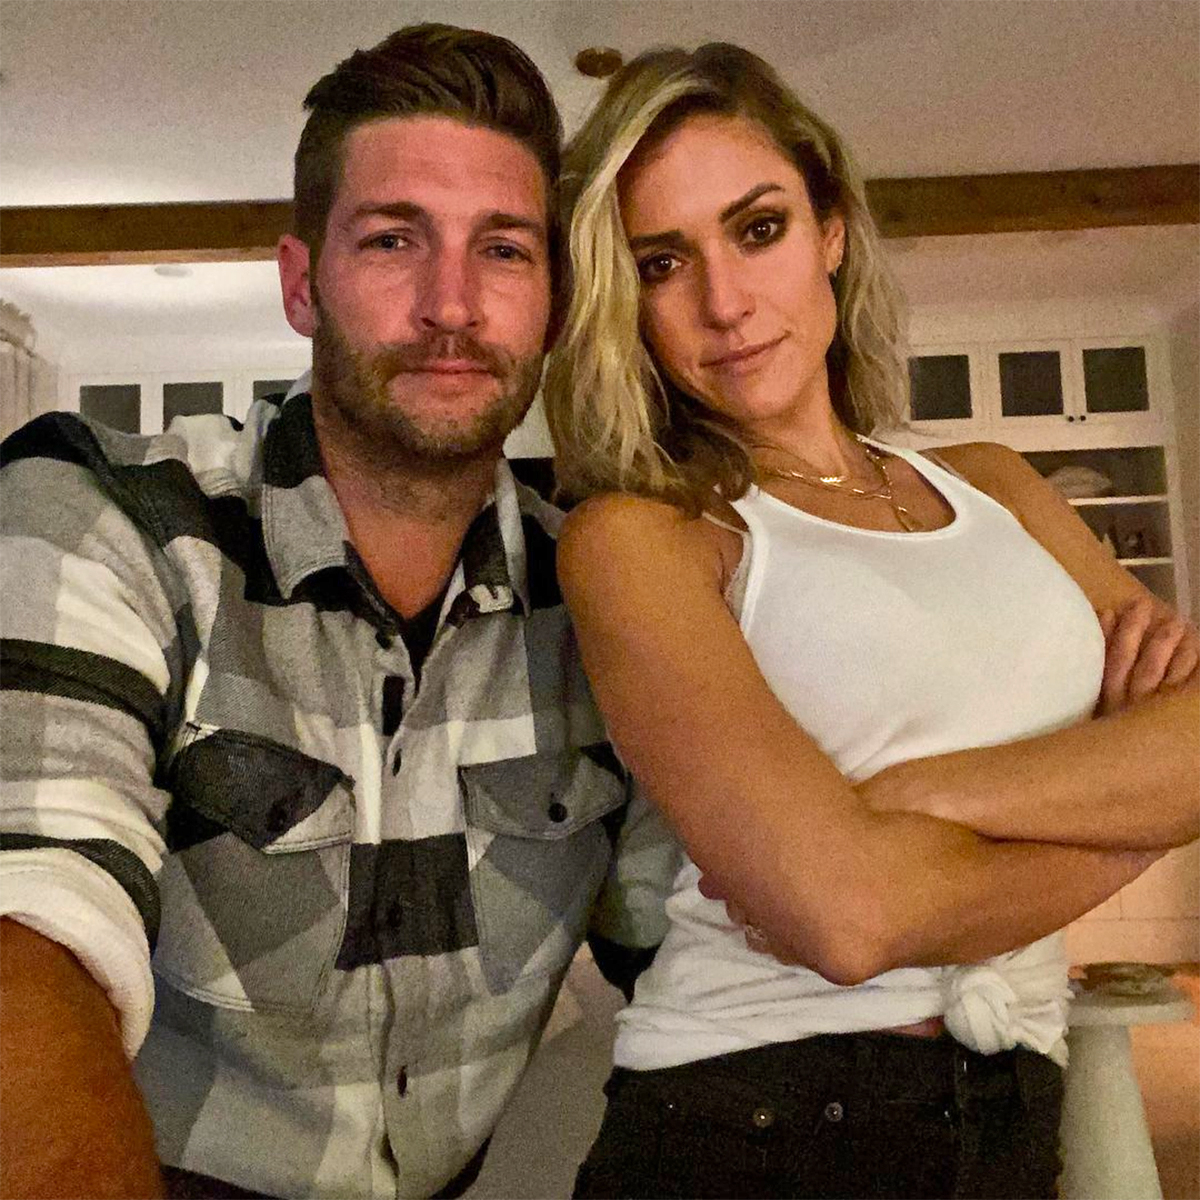 Jay Cutler and Jana Kramer 'split' after his ex-wife Kristin Cavallari  'told friends the romance would never work'